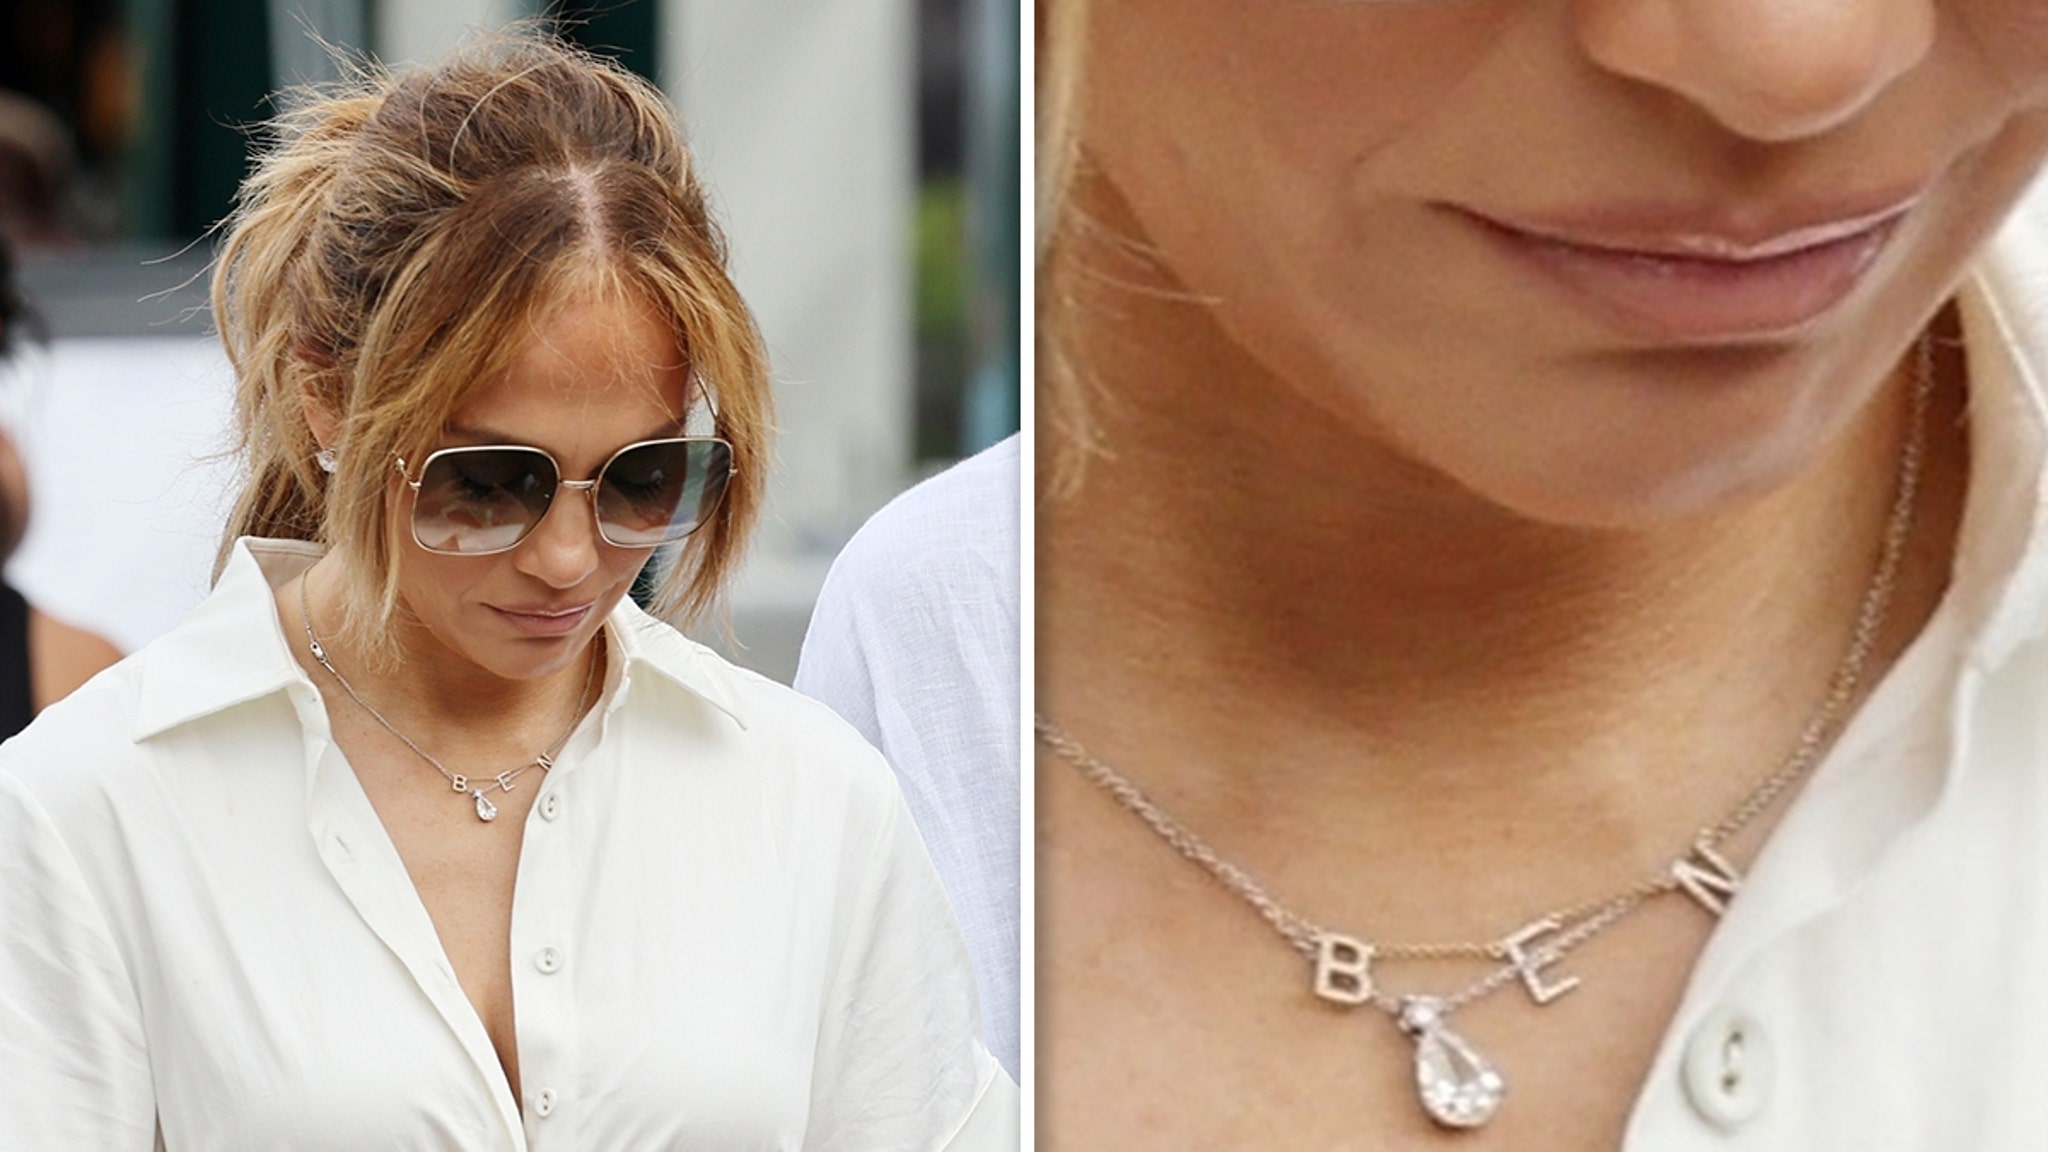 J Lo Solo in Portofino with Necklace Bearing Ben Affleck's Name